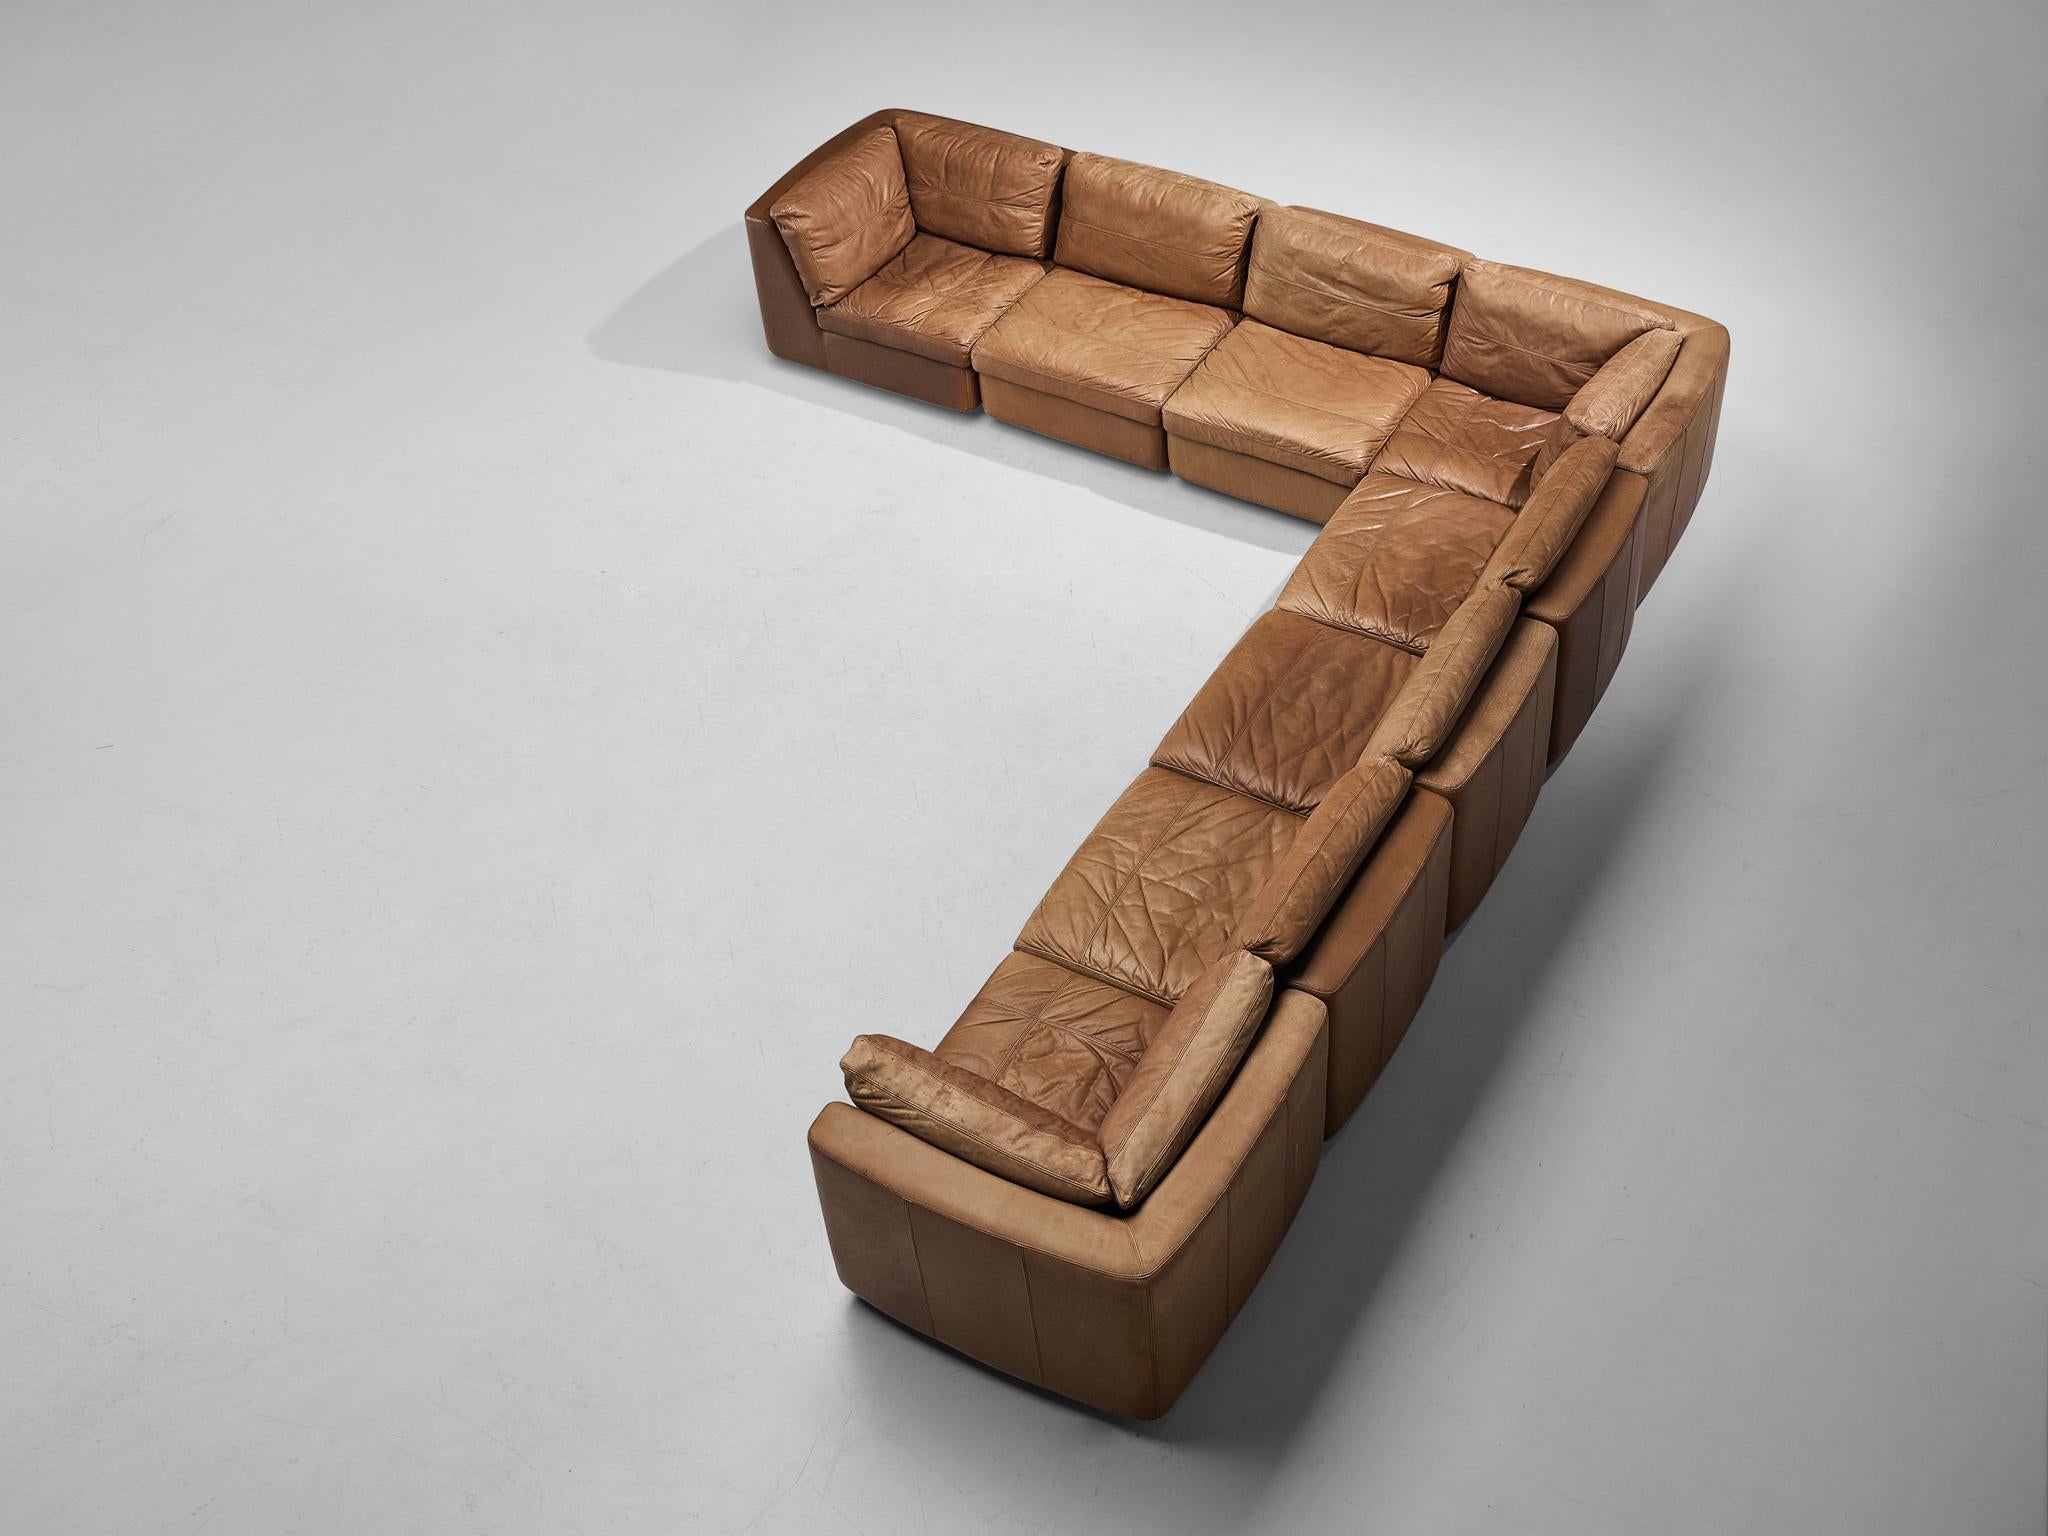 Modular sofa, leather, Germany, 1970s.

This well-designed sofa is fully executed in beautiful cognac leather with age-appropriate, admirable patina that gives this piece of furniture a strong and naturalistic character. This sofa is characterized